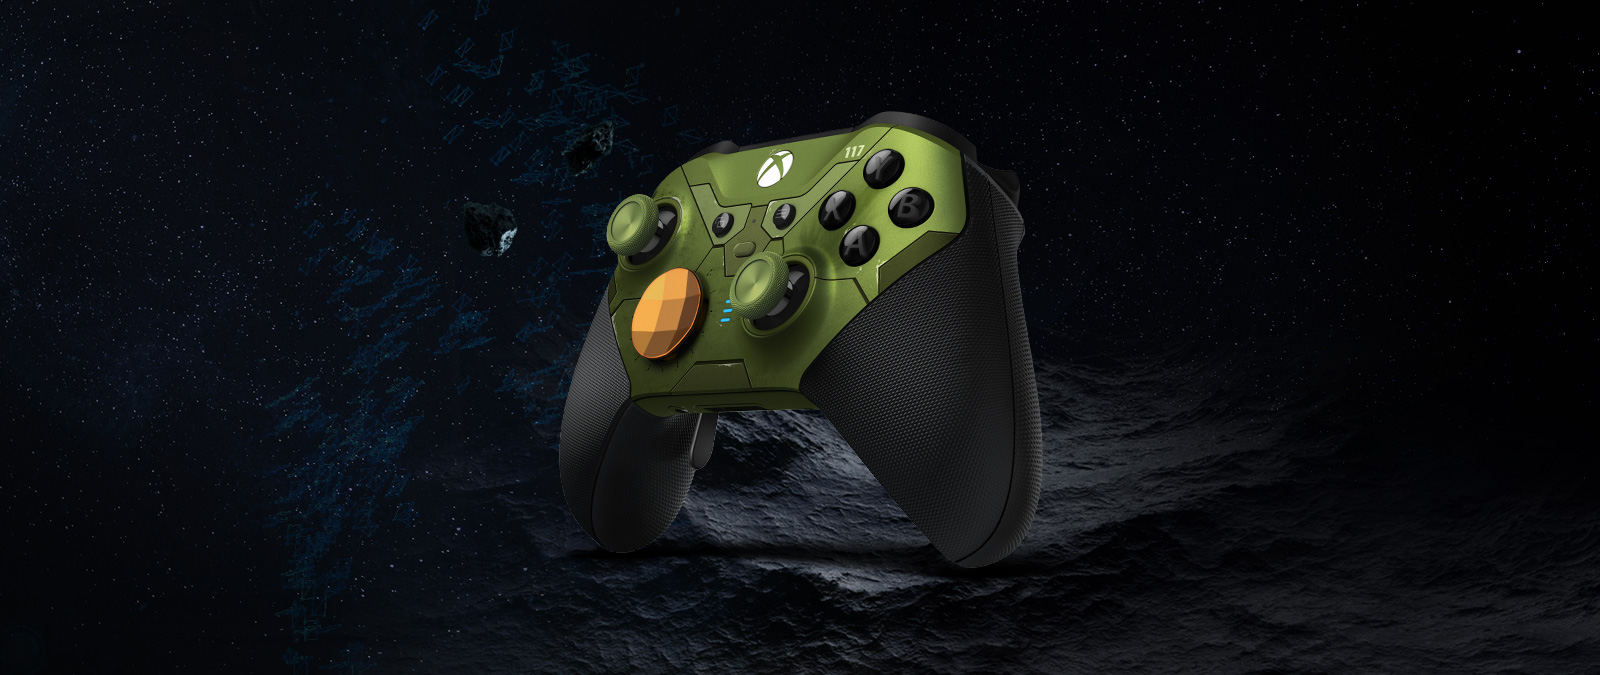 Right angle view of the Xbox Elite Wireless Controller Series 2 - Halo Infinite Limited Edition floating in space